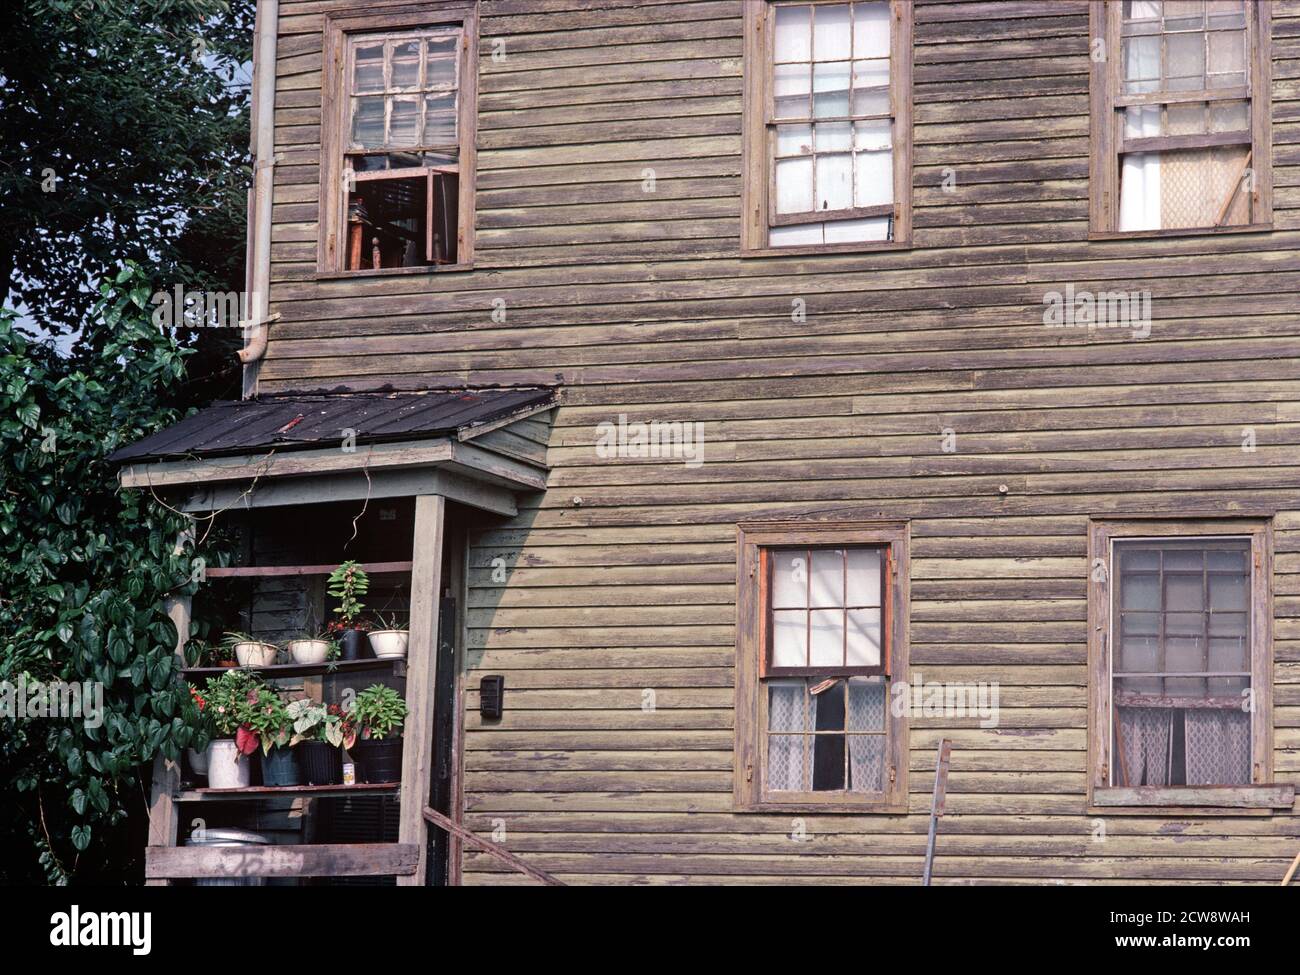 WOODEN CLAPBOARD HOUSE WITH PORCH, DOWNTOWN SAVANNAH, GEORGIA, USA, 1980s Stock Photo